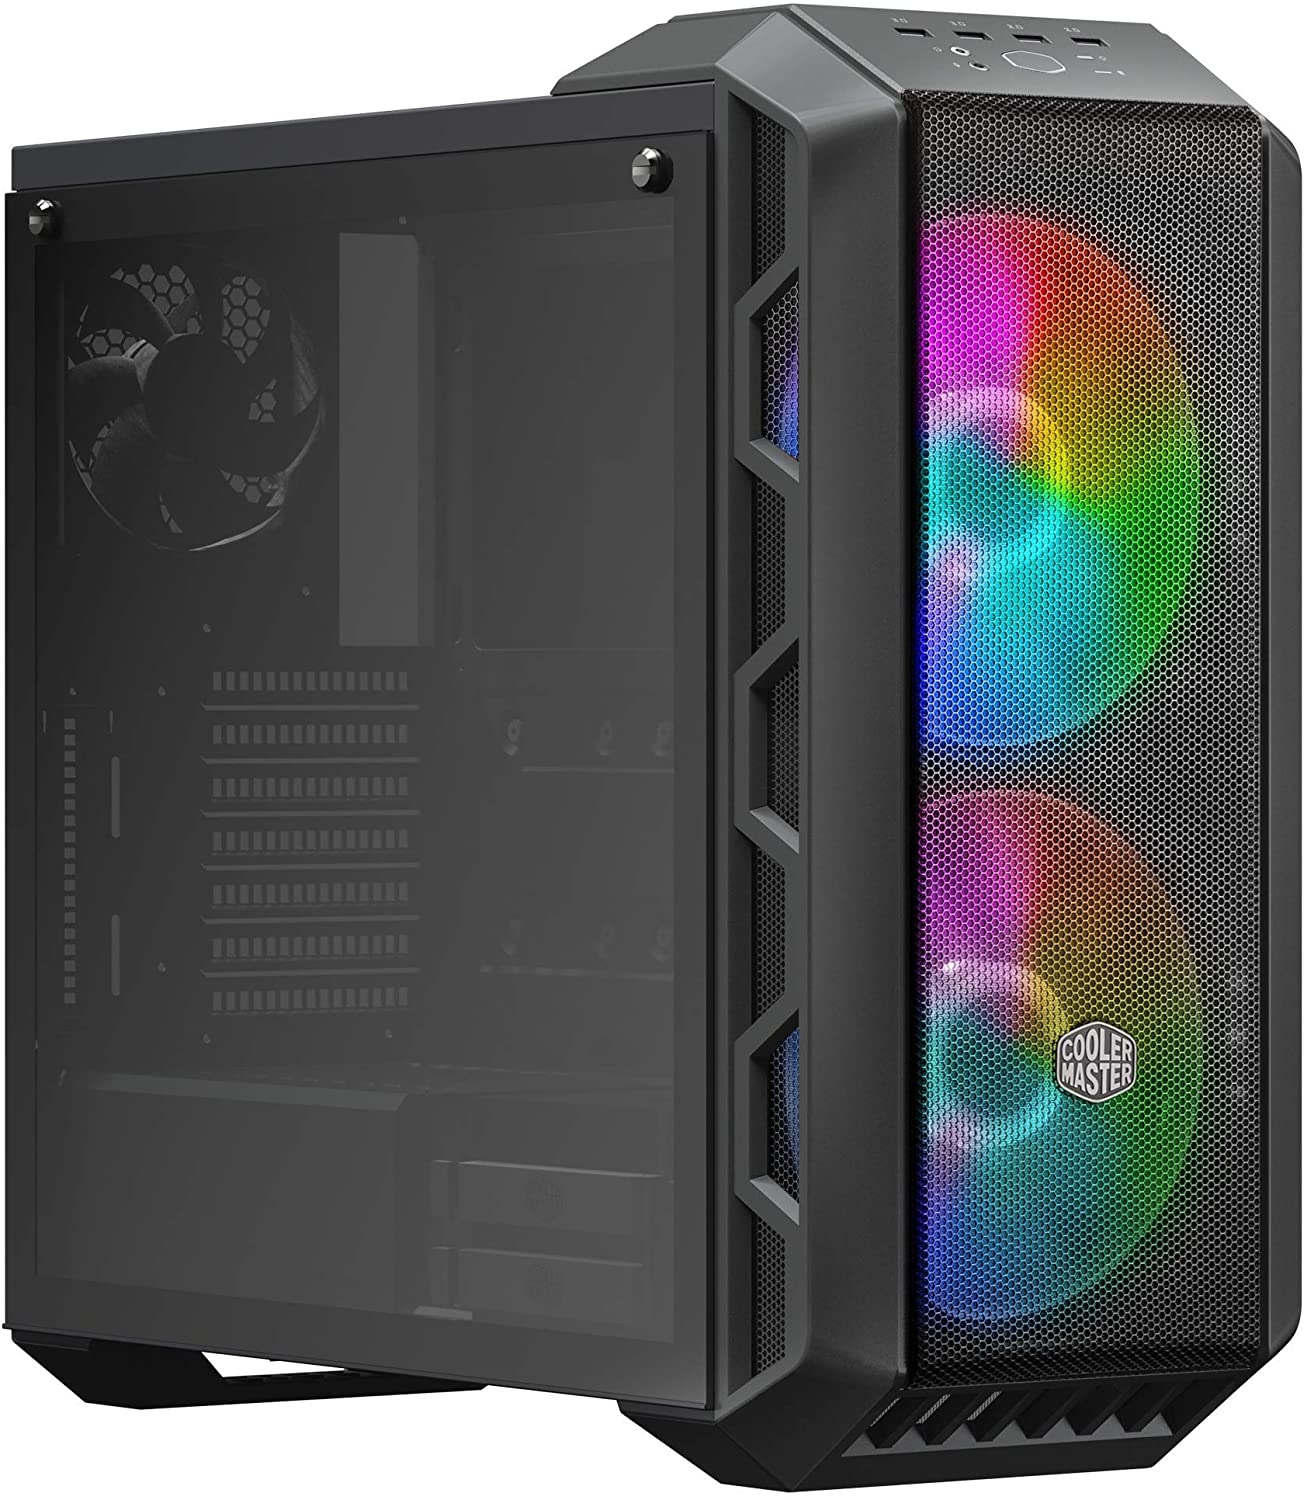 Cooler Master MasterCase H500 ATX Mid-Tower Case w/ Tempered Glass Side Panel $110 AR & Free Shipping $109.99